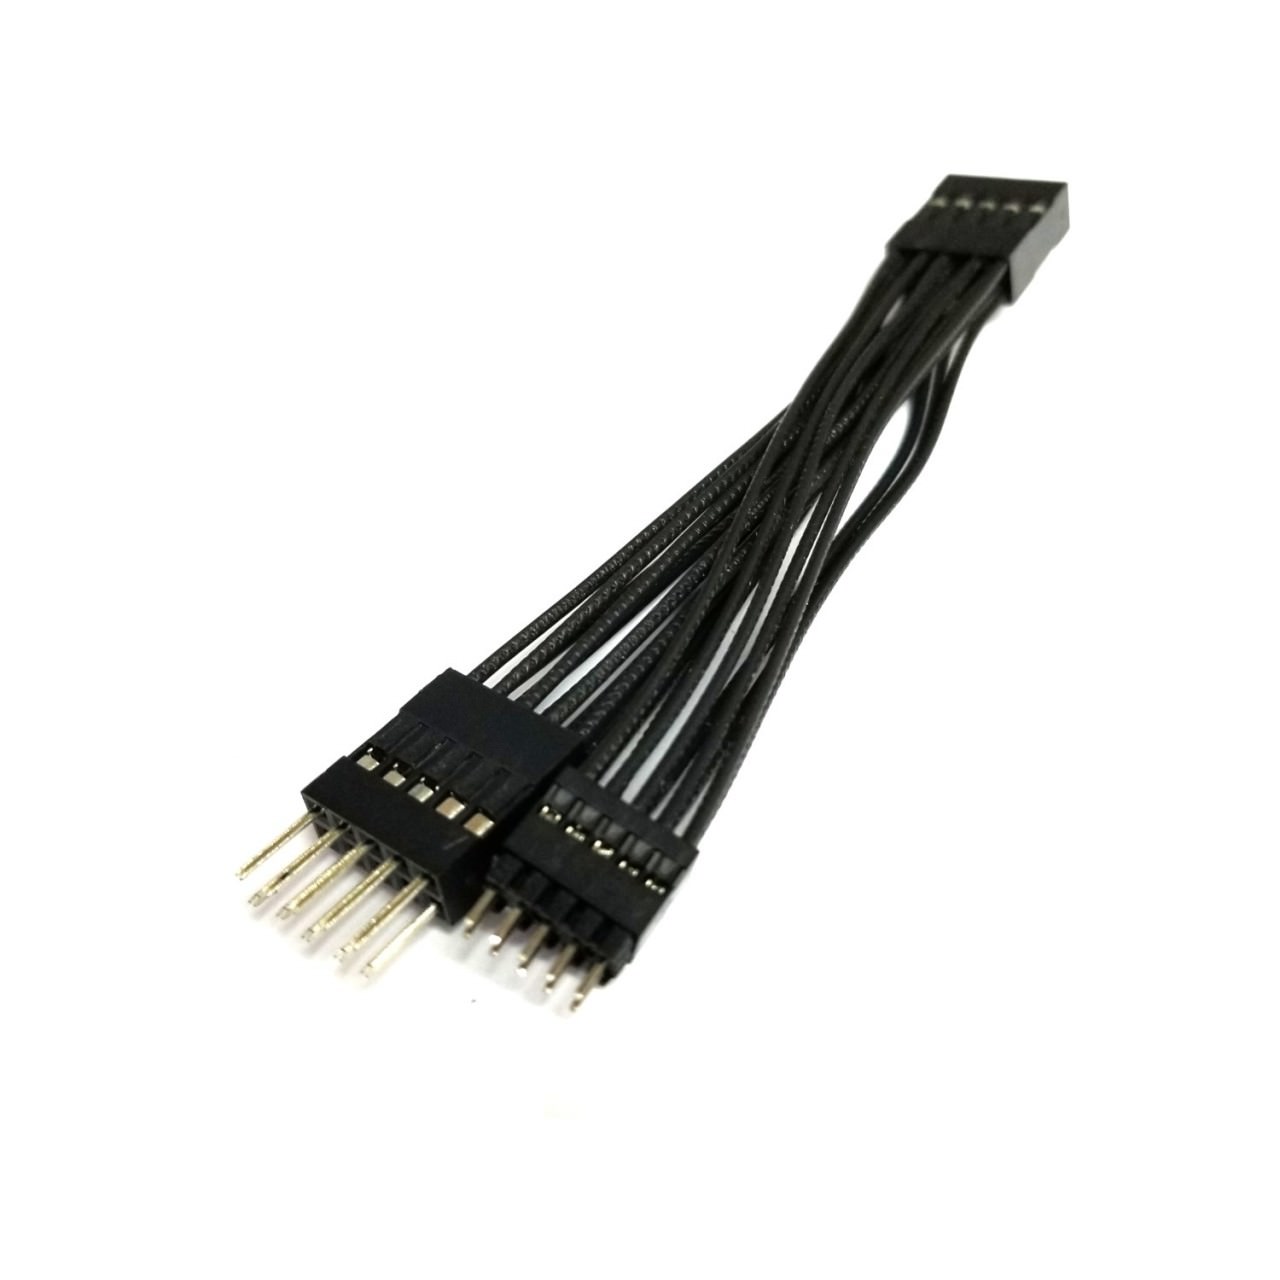 Internal USB 2.0mm and 2.54mm 10 Pin Male Splitter Cable 5cm - MODDIY